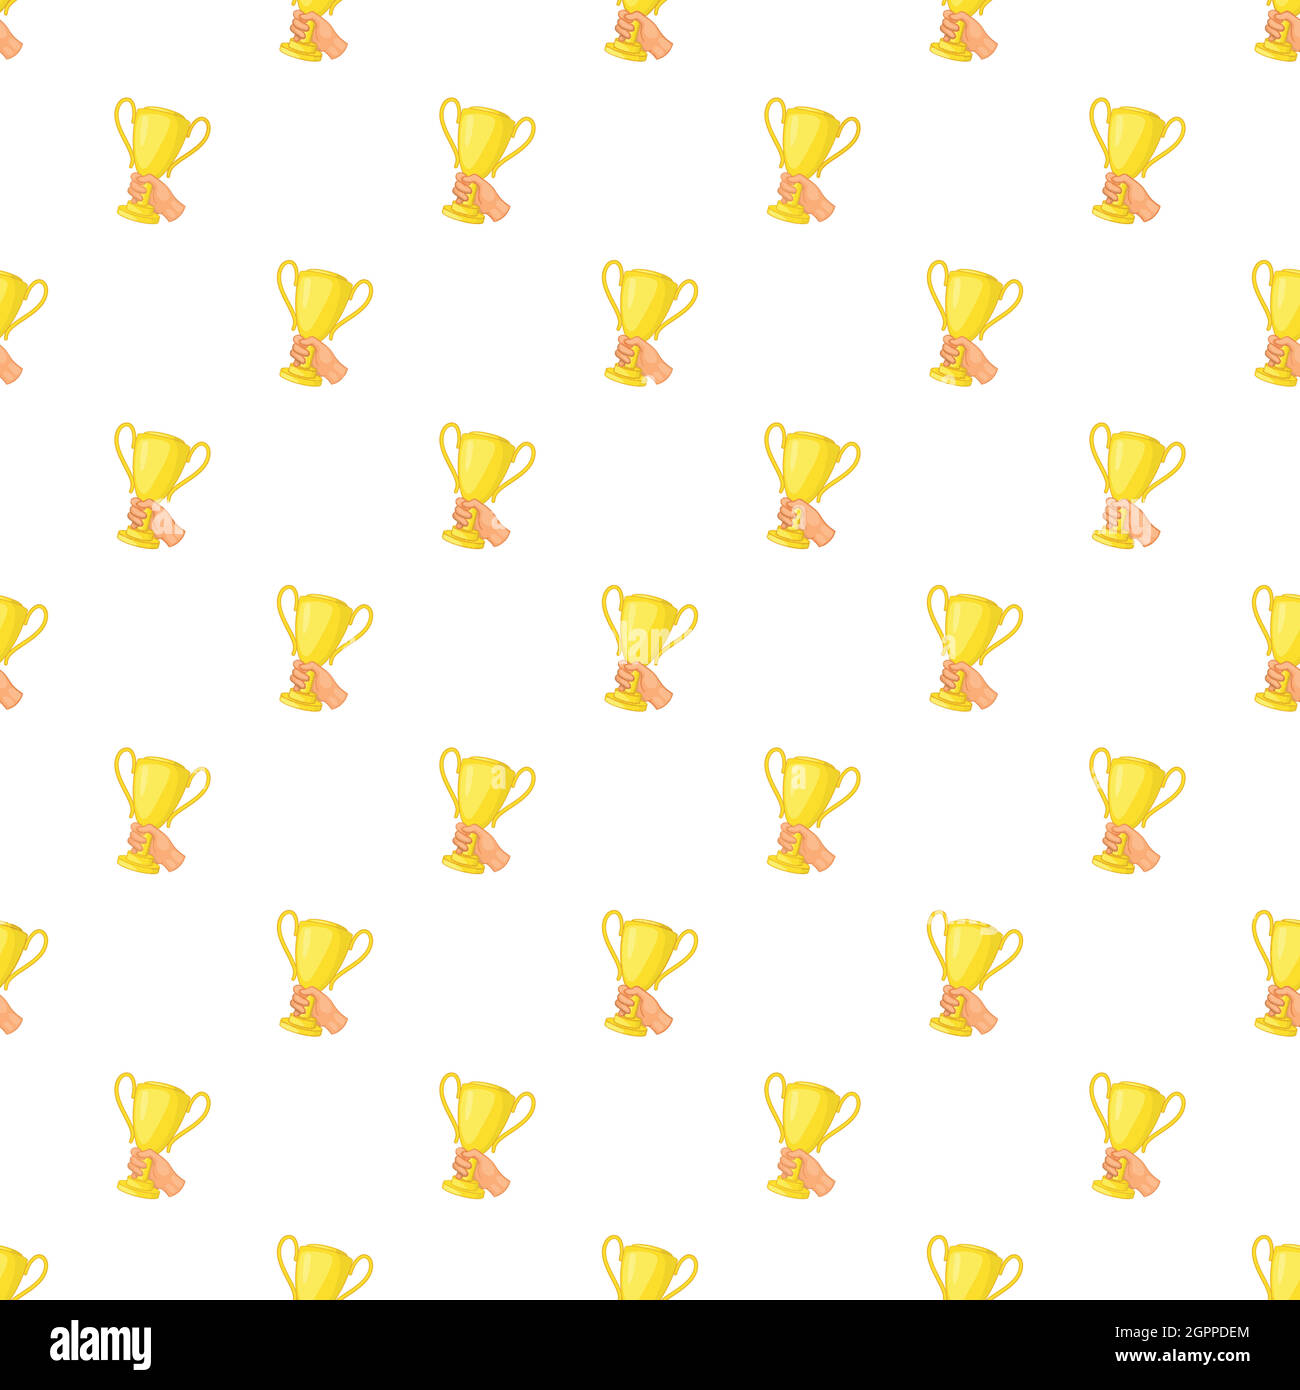 Cup in hand pattern, cartoon style Stock Vector